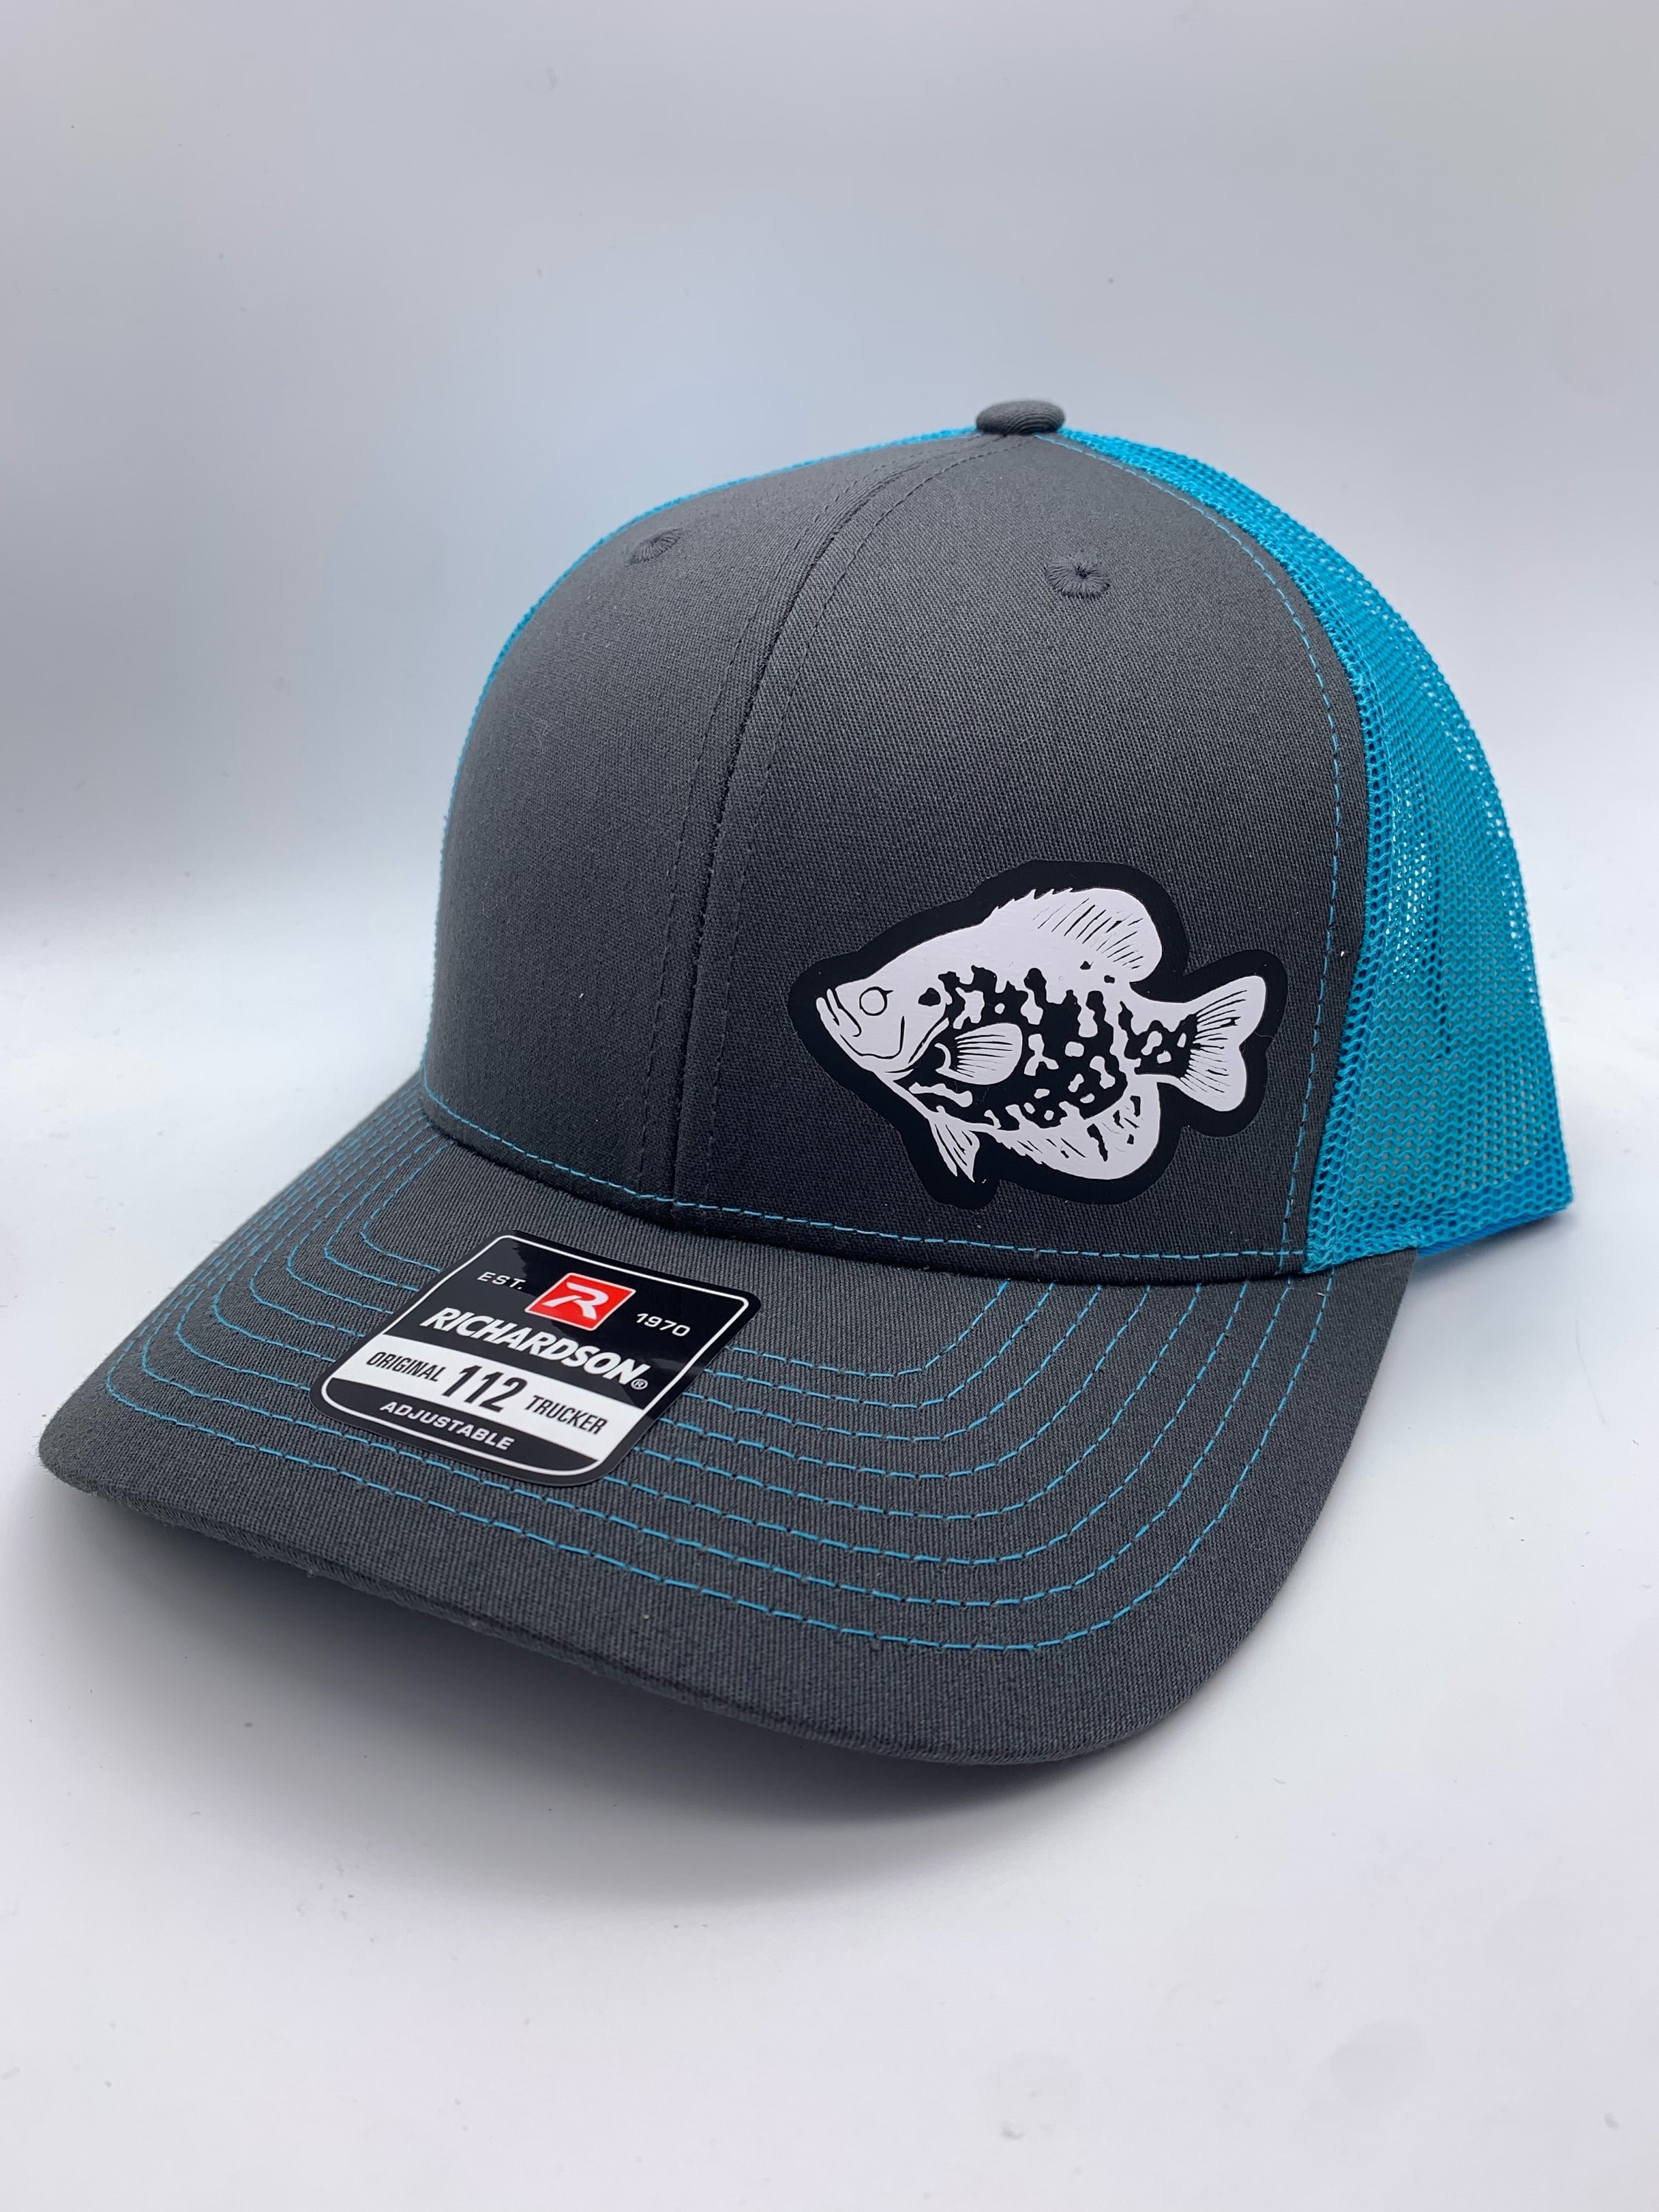 Crappie Fishing Snapback Adjustable Hat with Multiple Hat Color Options